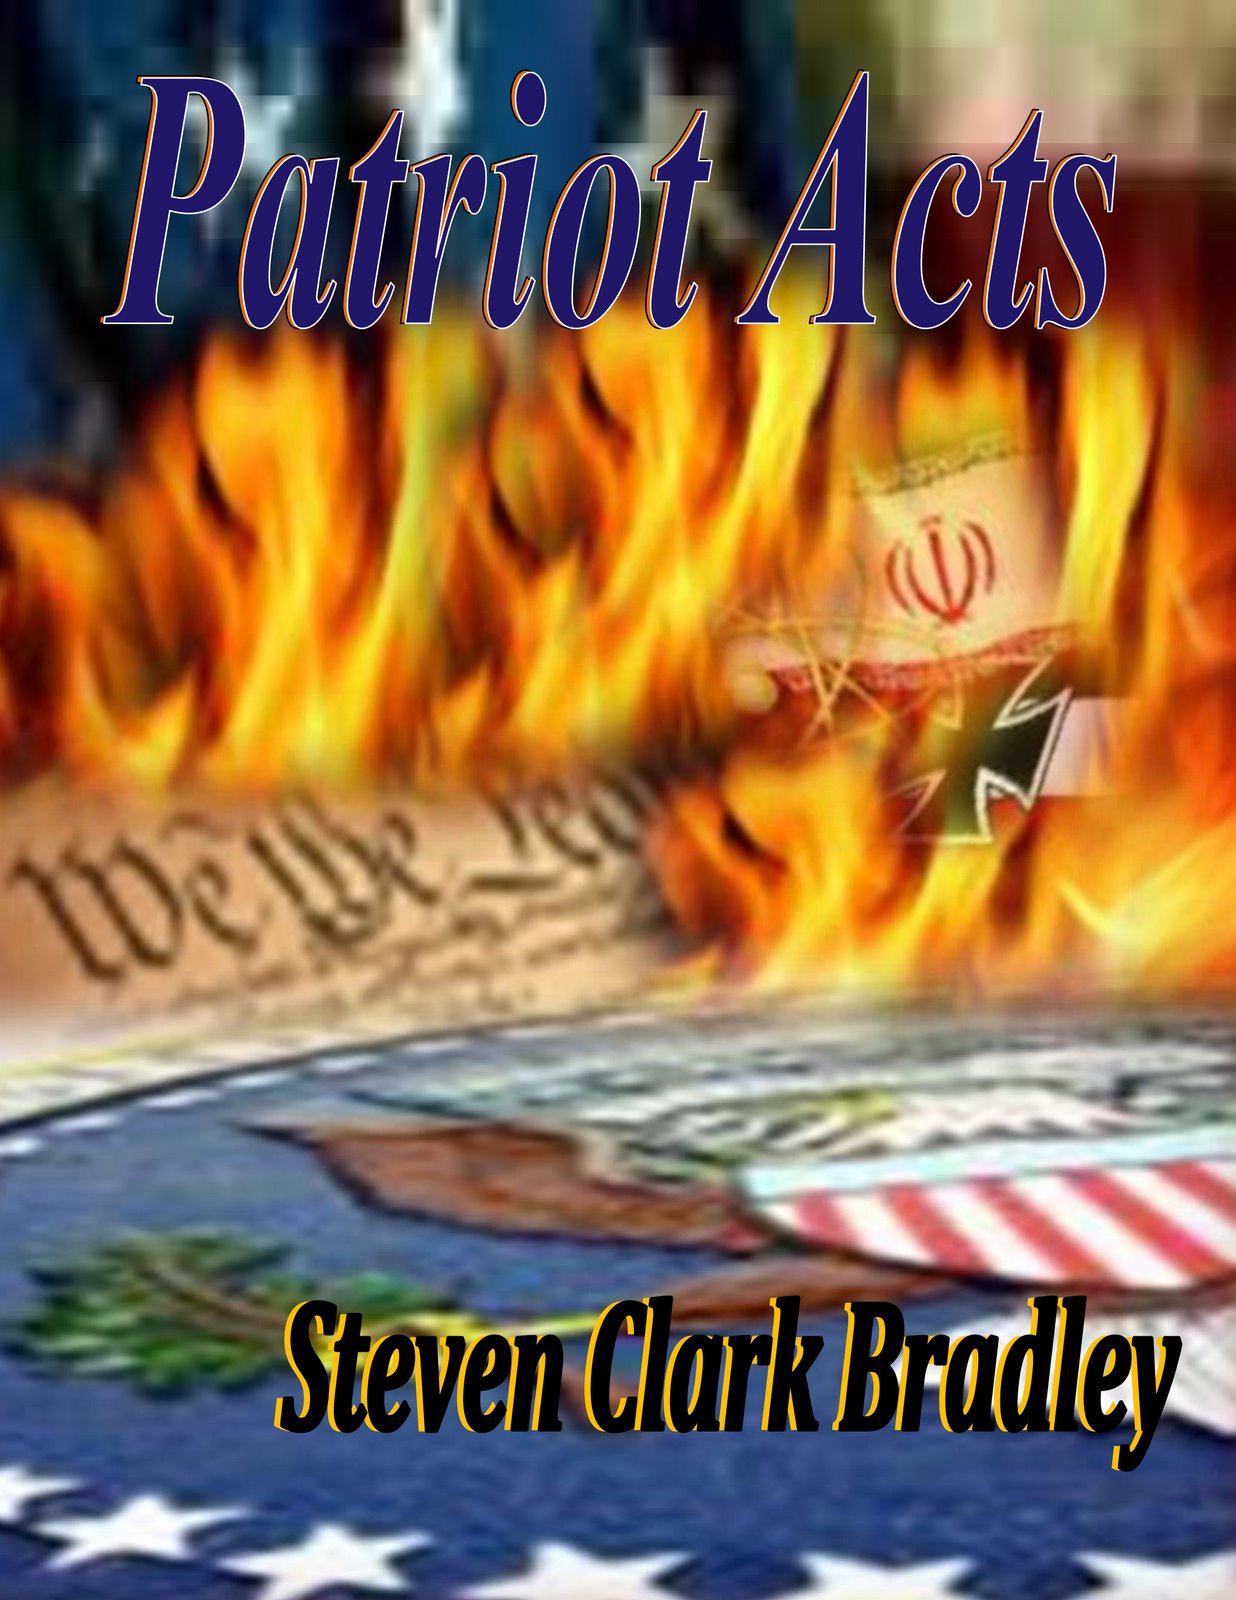 [Final+Patriot+Acts+Book+Cover+4+Revised.jpg]